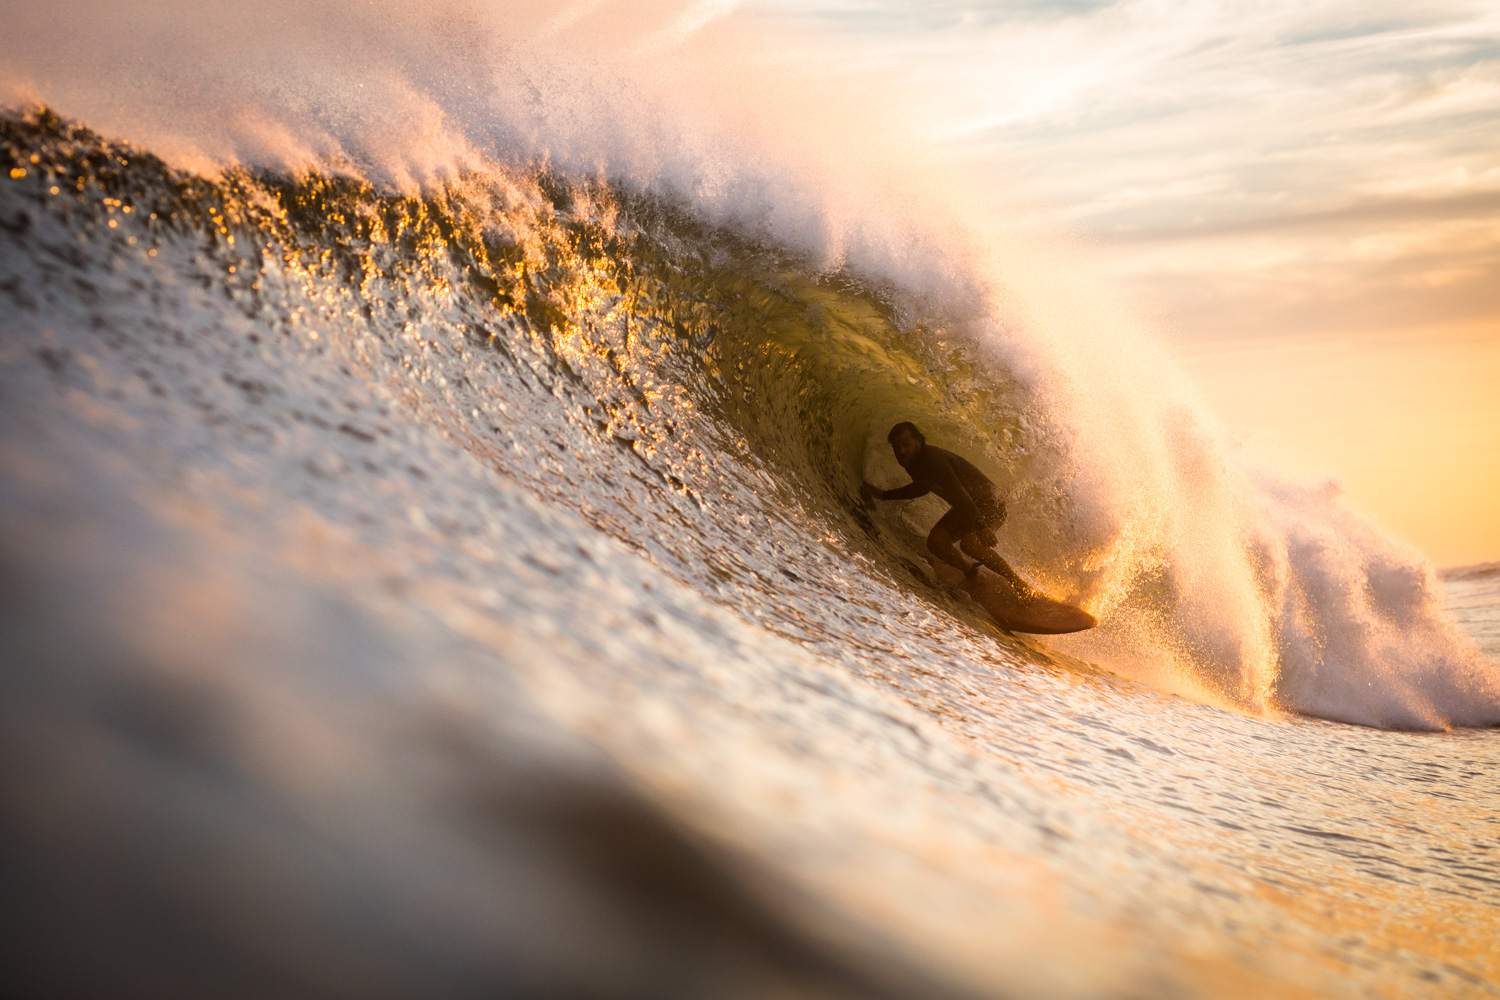 Mikey DeTemple. Photo: Ryan Moore